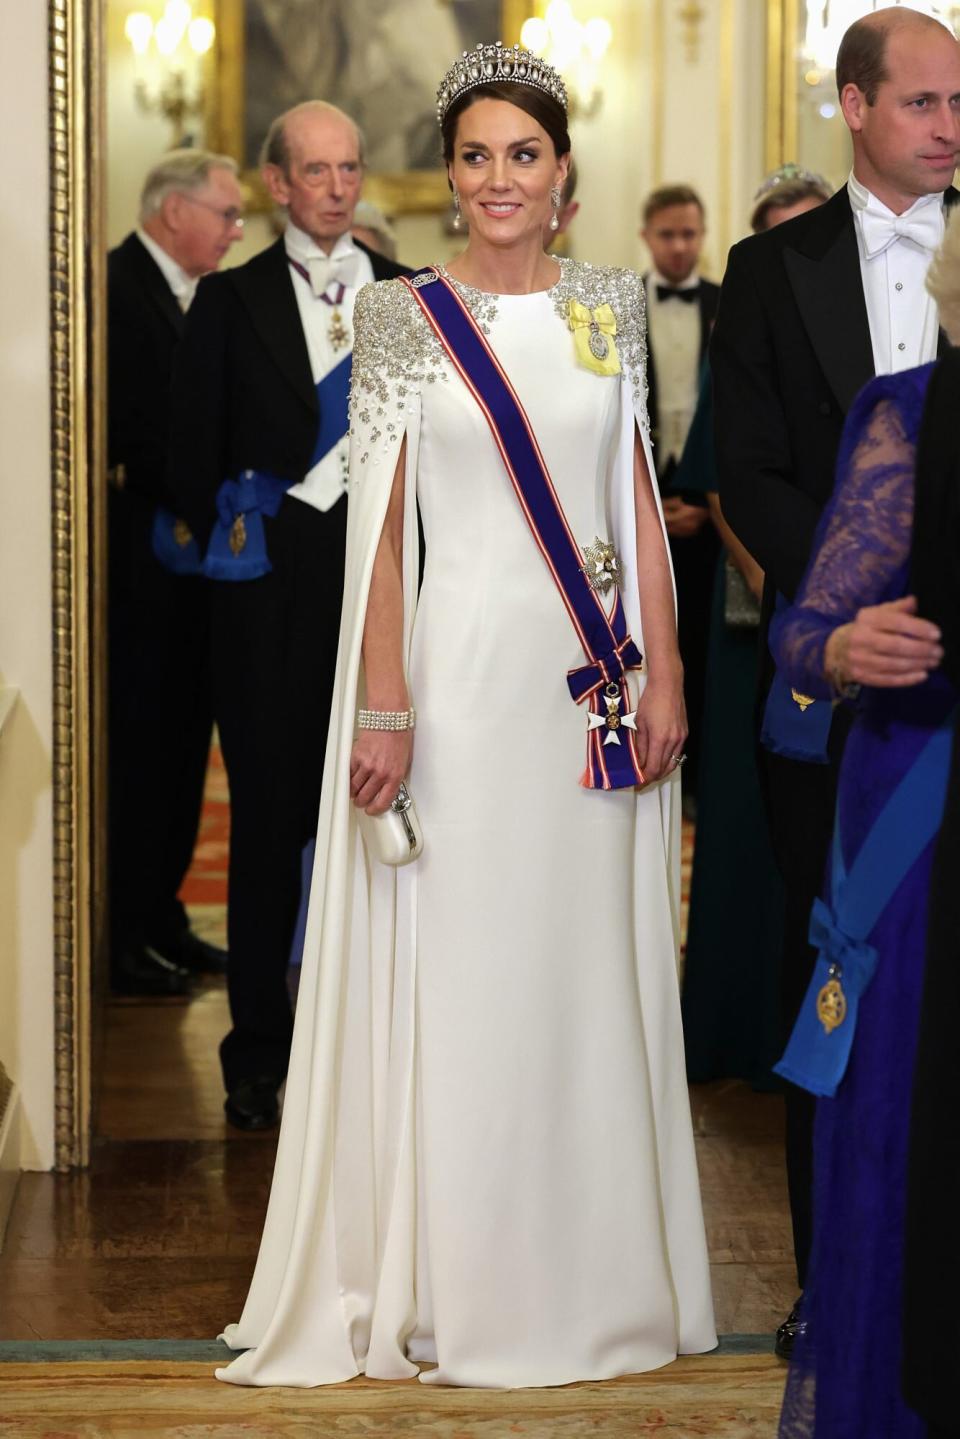 Catherine, Princess of Wales during a state banquet at Buckingham Palace on November 22, 2022 in London, England.  This is the first state visit the UK has hosted with King Charles III as monarch, and the first state visit here by a South African leader since 2010.